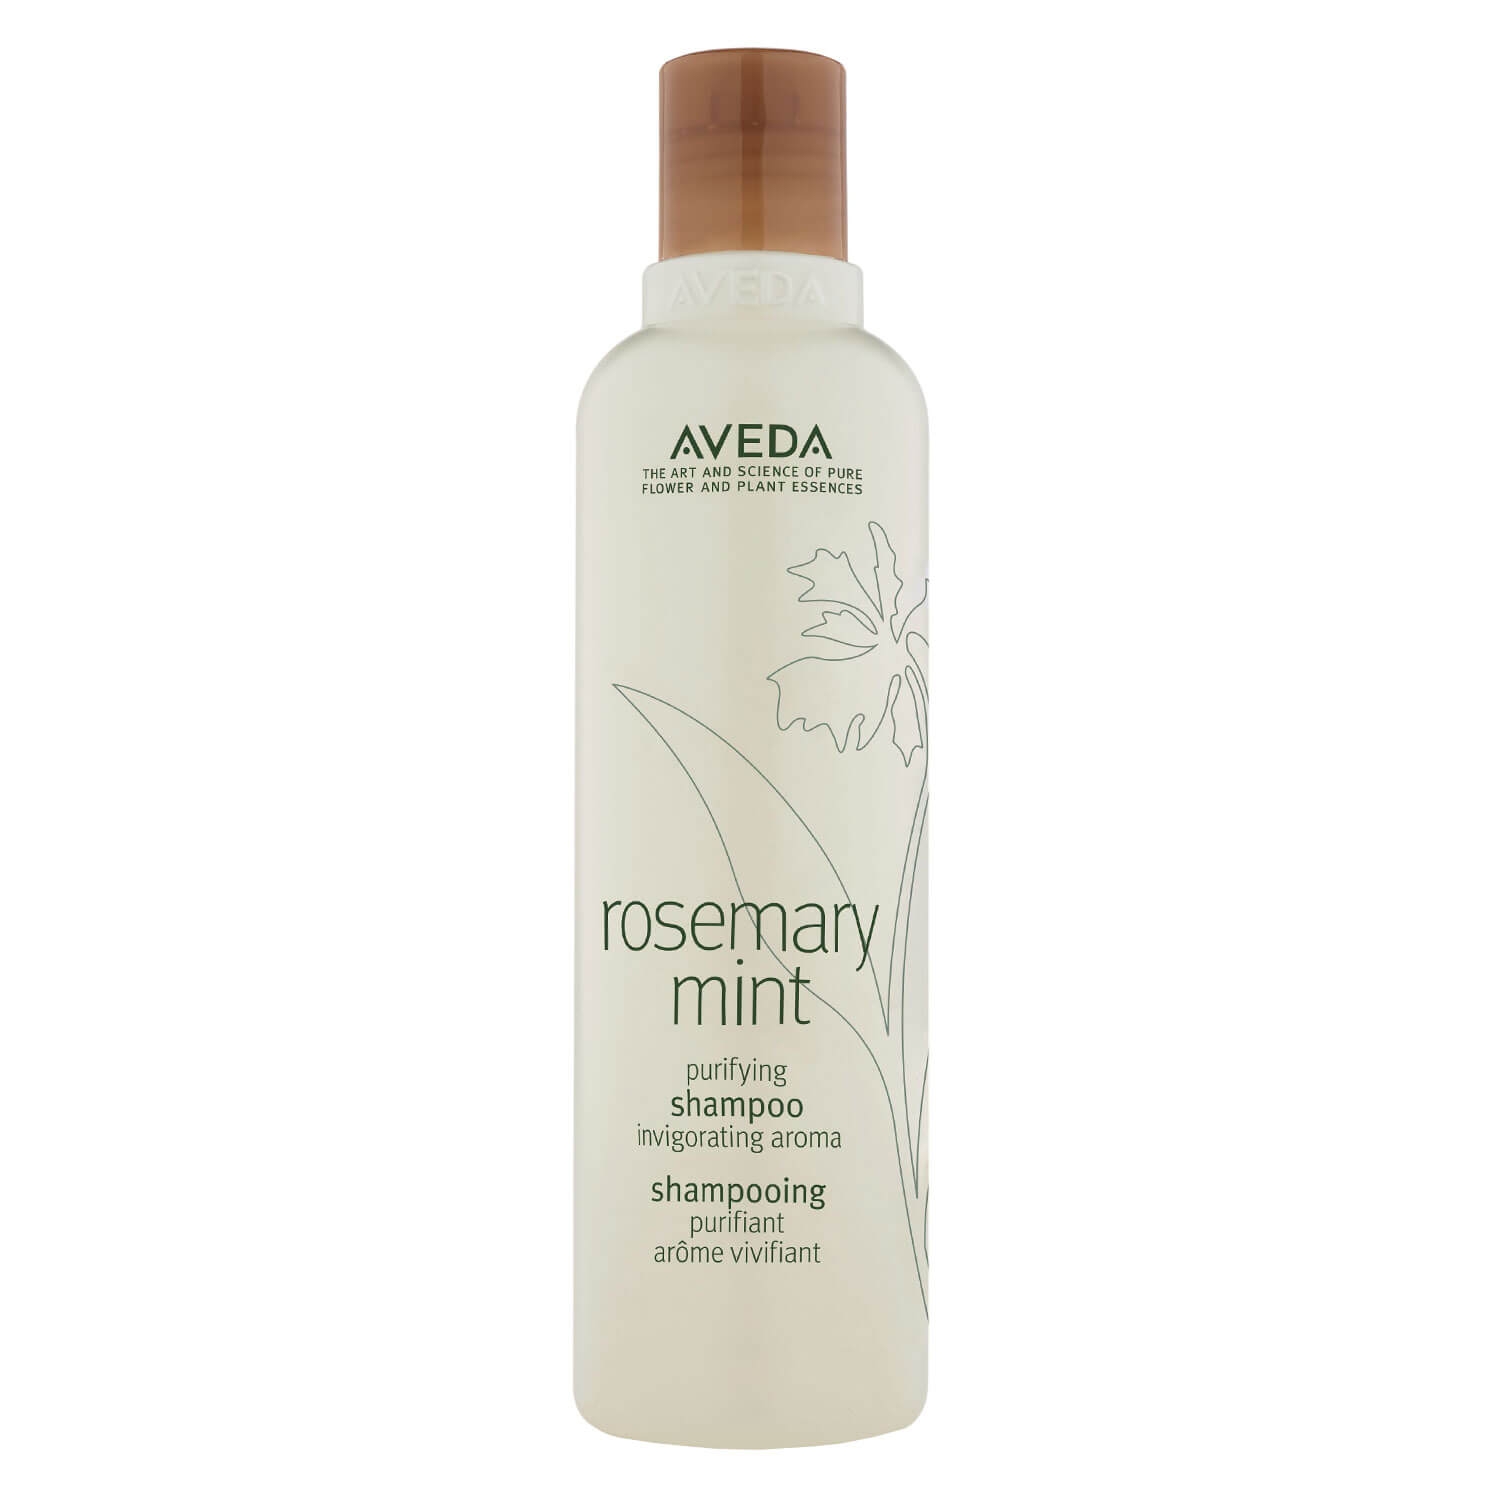 Product image from rosemary mint - purifying shampoo